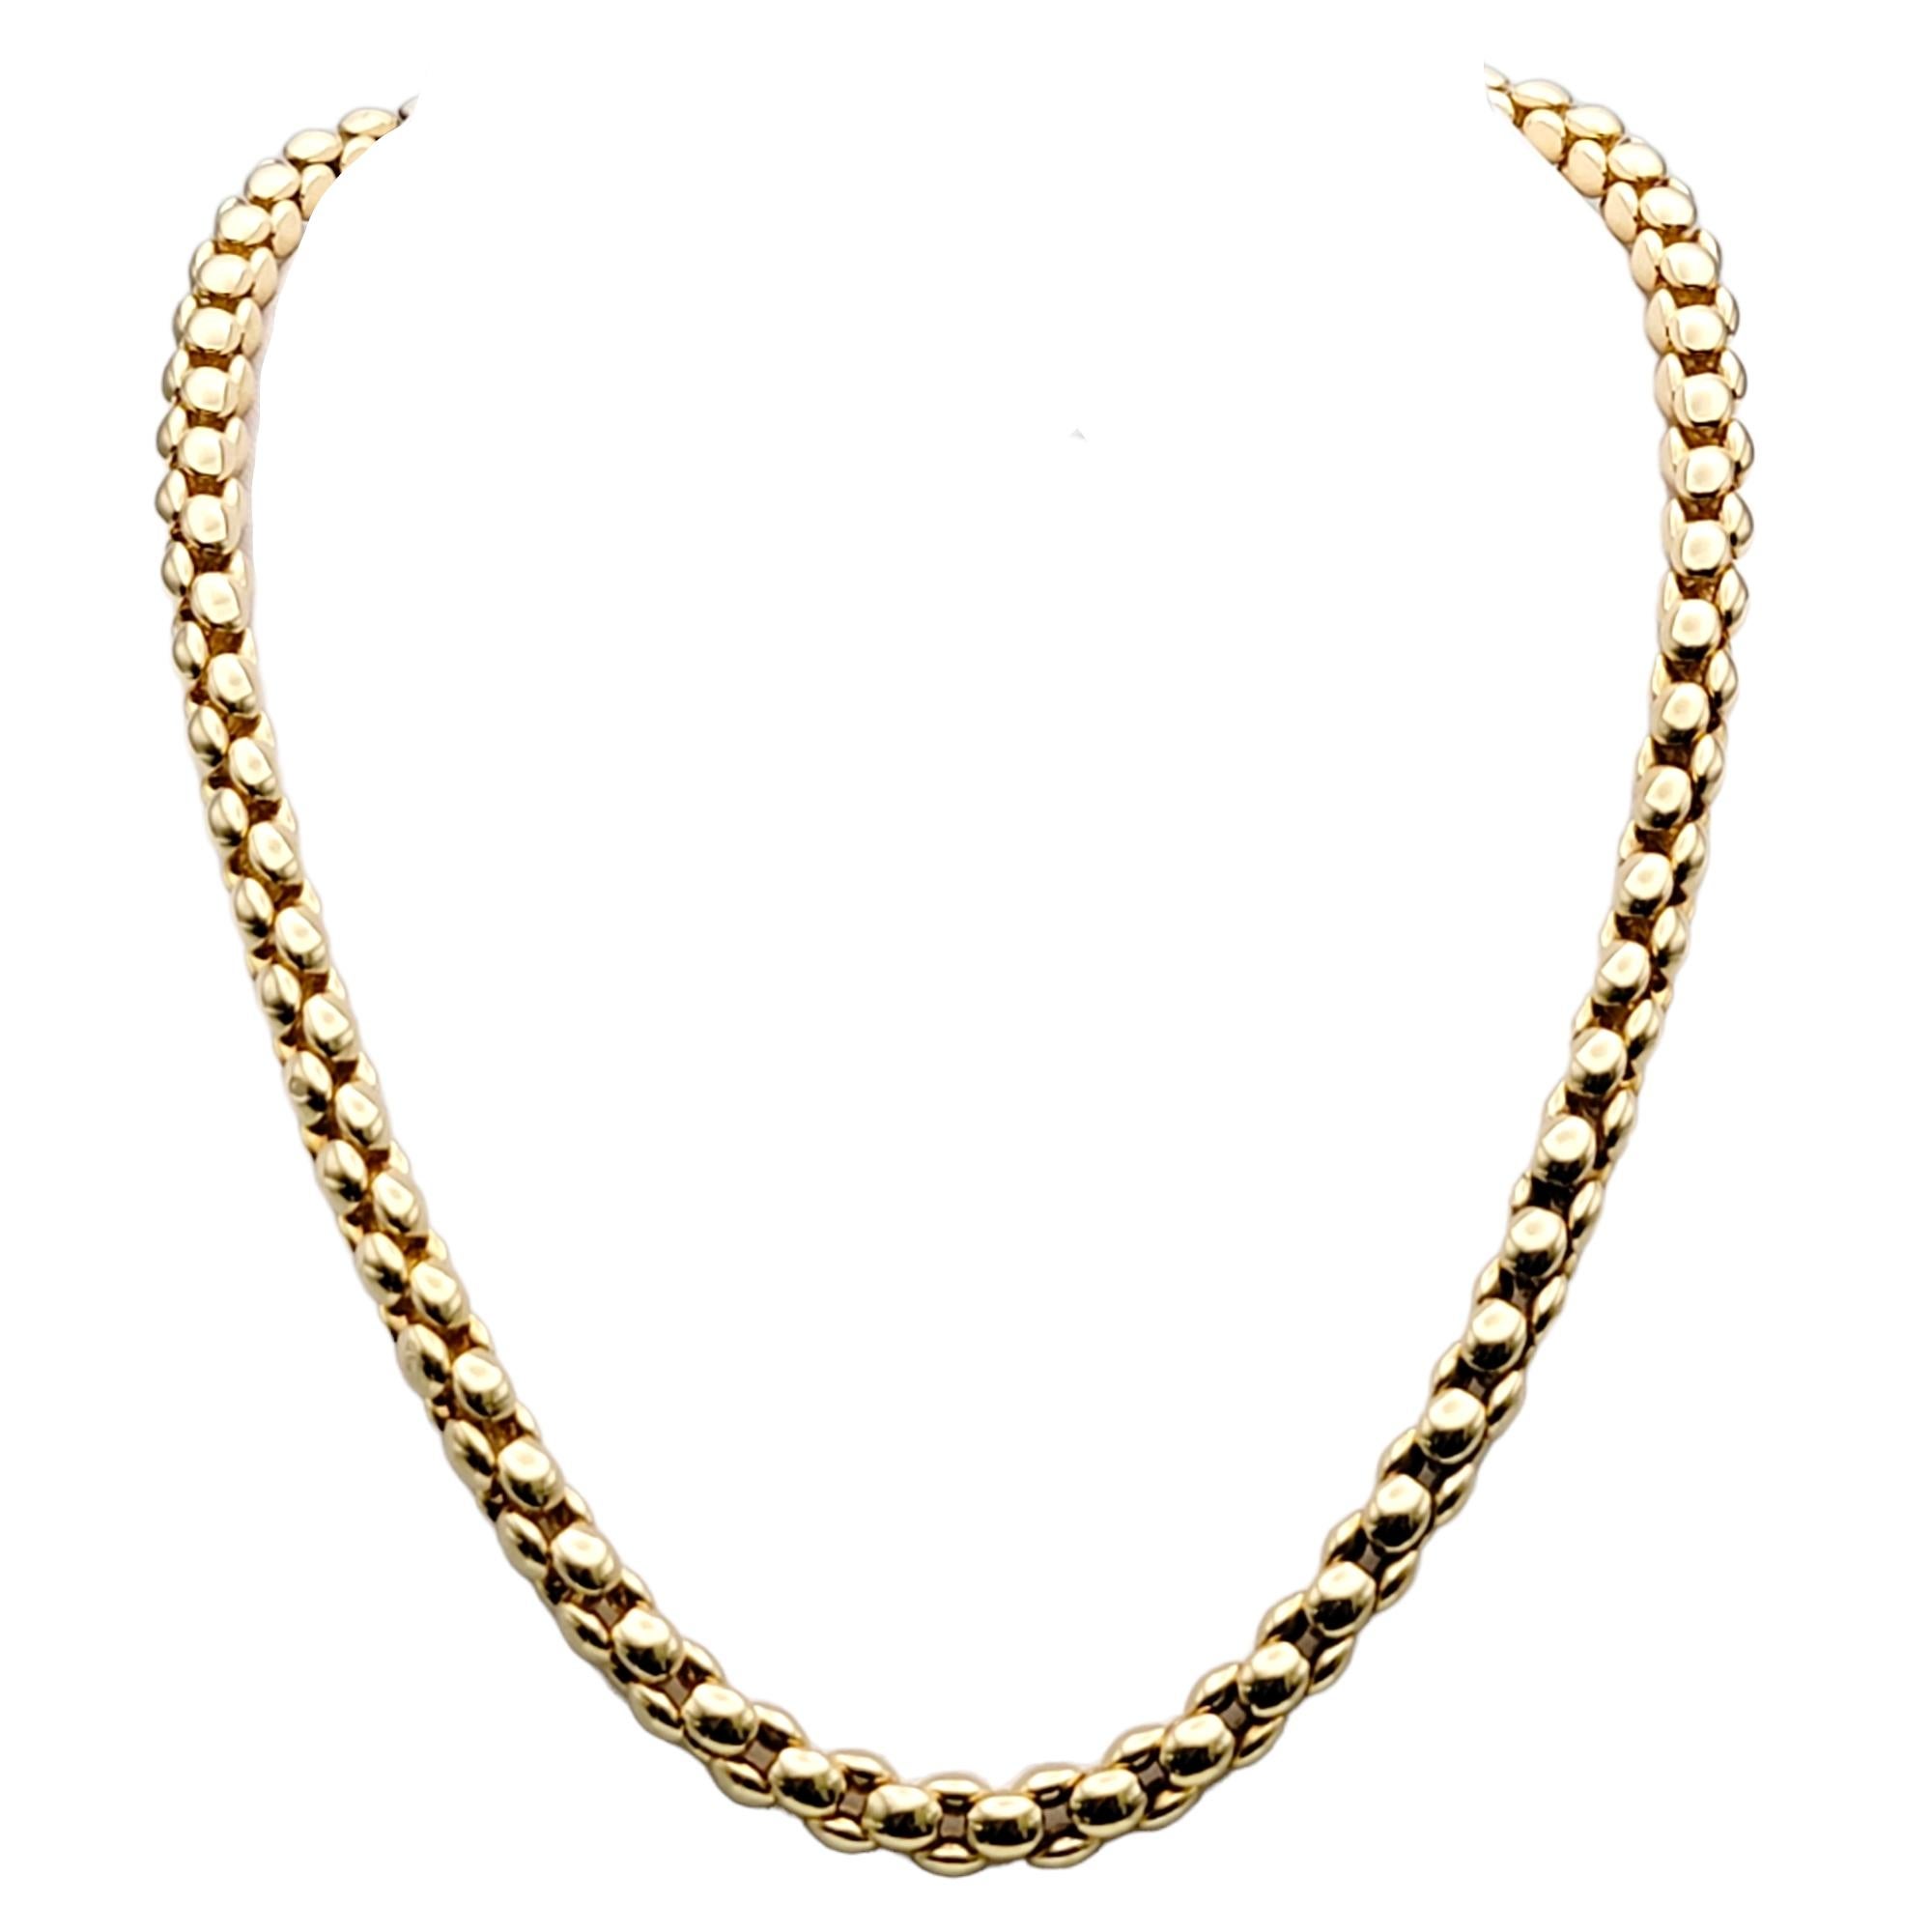 Simple yet elegant 18 karat yellow gold chain necklace by Chiampsean. This versatile piece can be dressed up or down and worn with just about everything. The timeless design gently hugs the neck, offering effortless style and sophistication. Worn